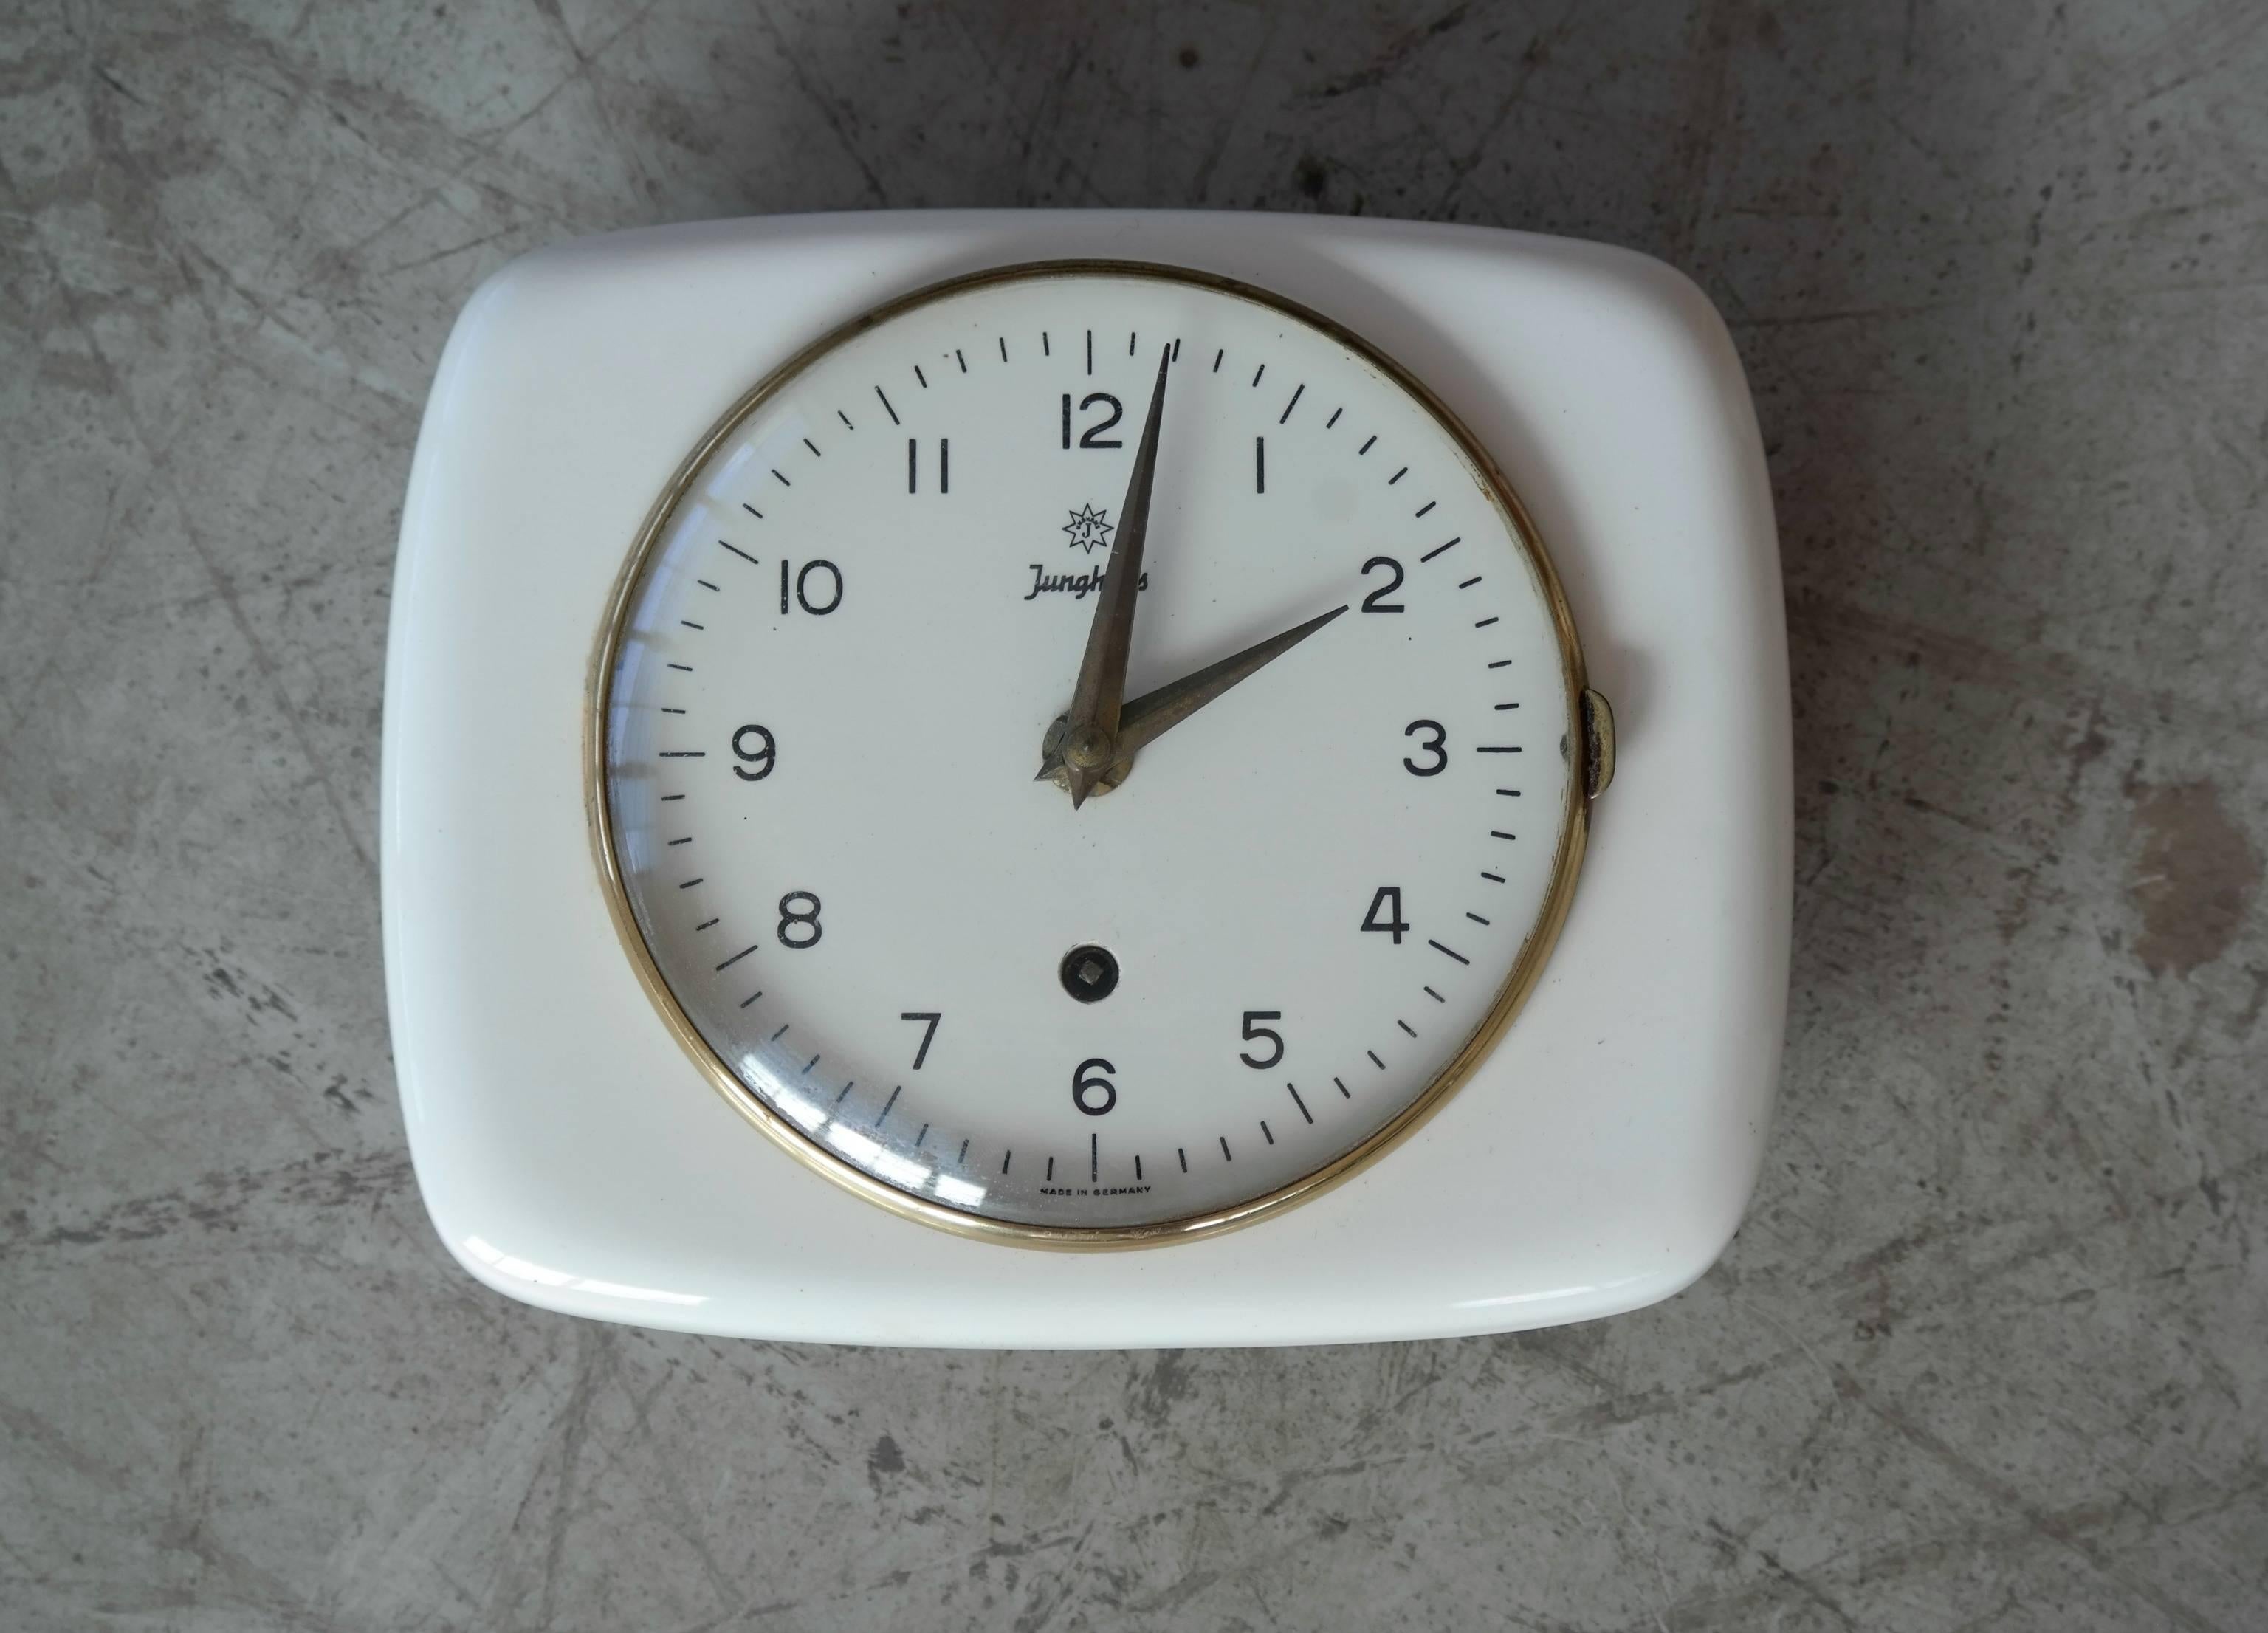 Very cool Mid-Century Modern wall clock by Junghans of Western Germany with the design attributed to Max Bill. The clock is mechanical and comes with a wind-up key. Made of bakelite. Fully functional and in very good overall condition with some